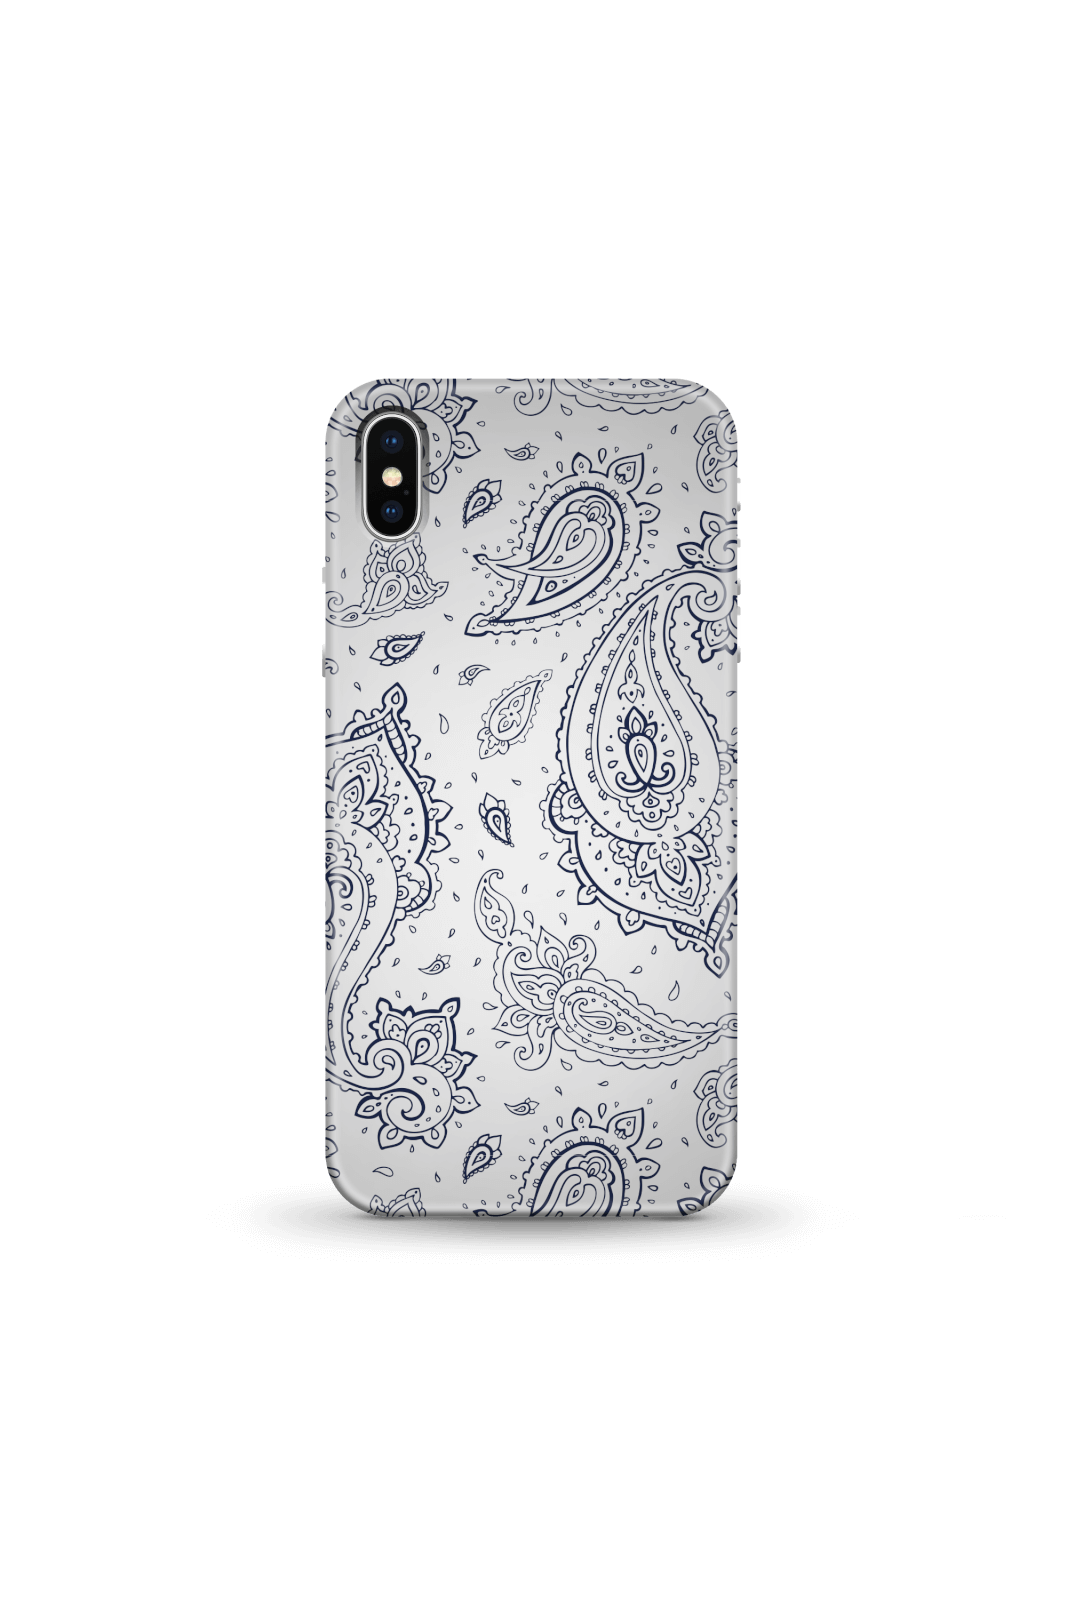 White & Blue Paisley Phone Case for iPhone and Android - iPhone 5/5s - Snap Case - Matte